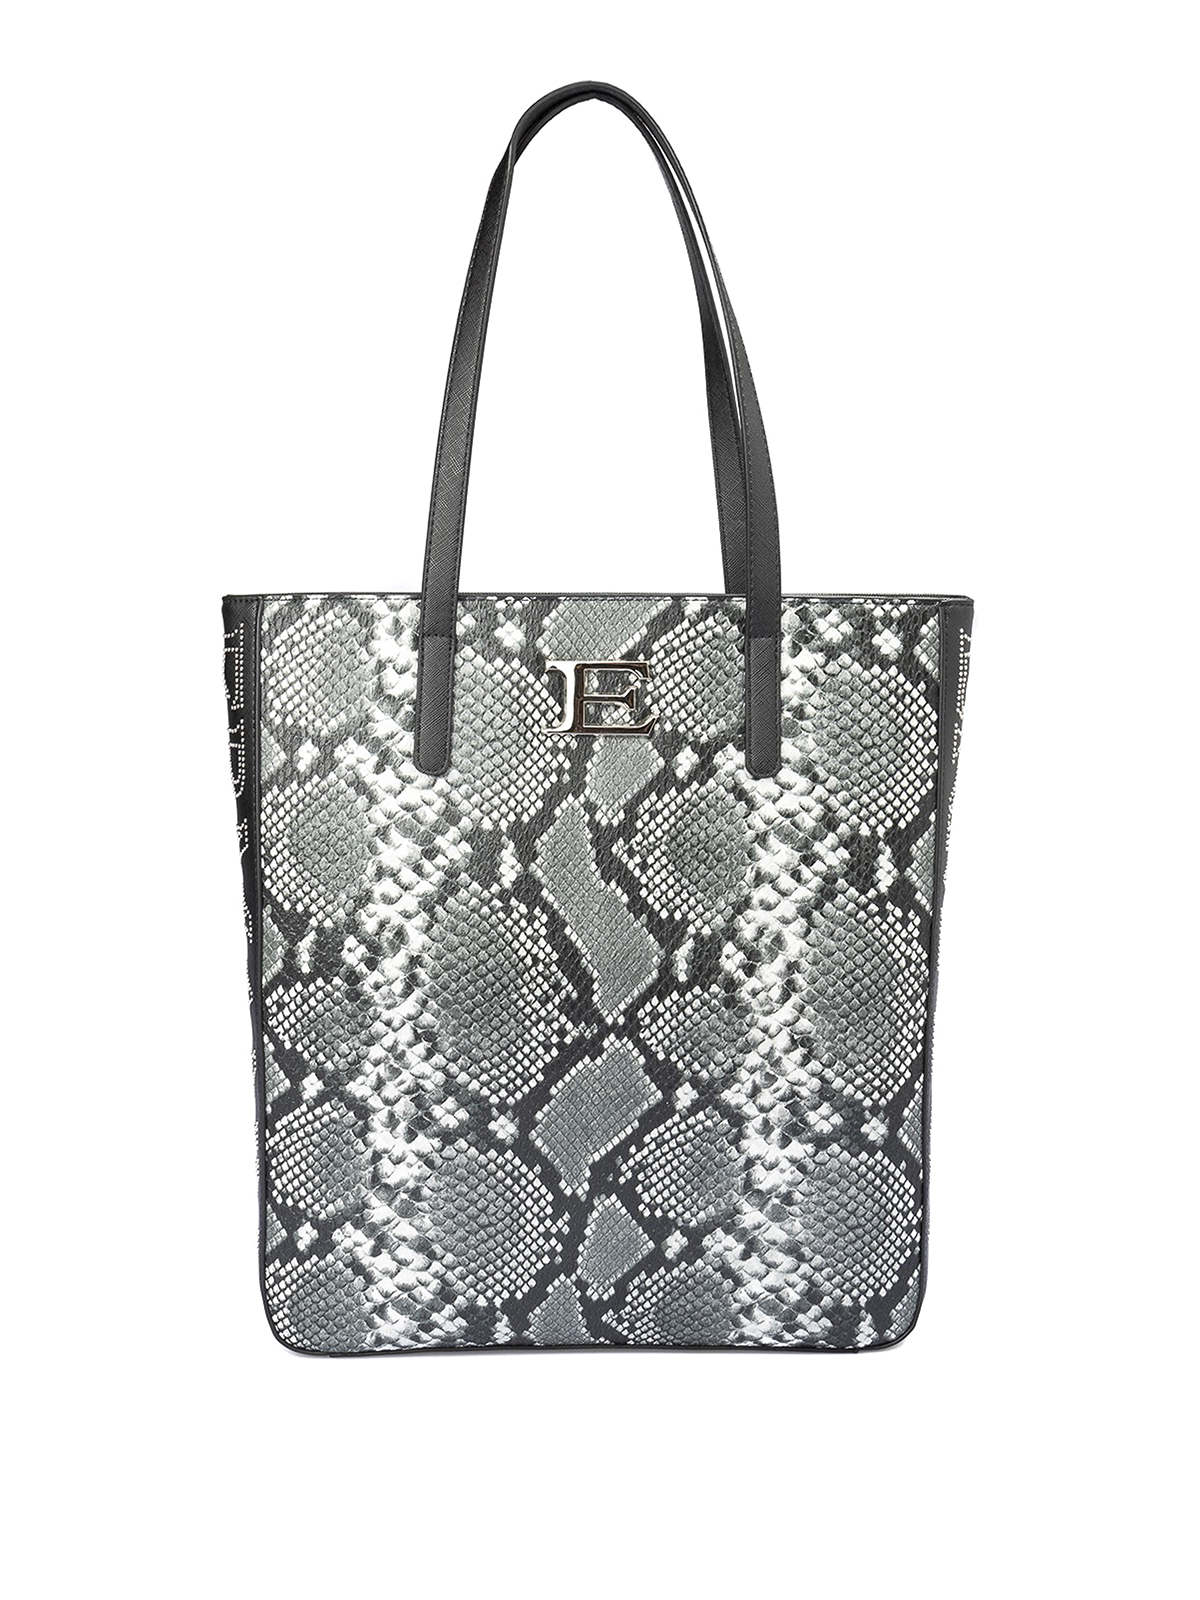 Snake print faux leather tote bag